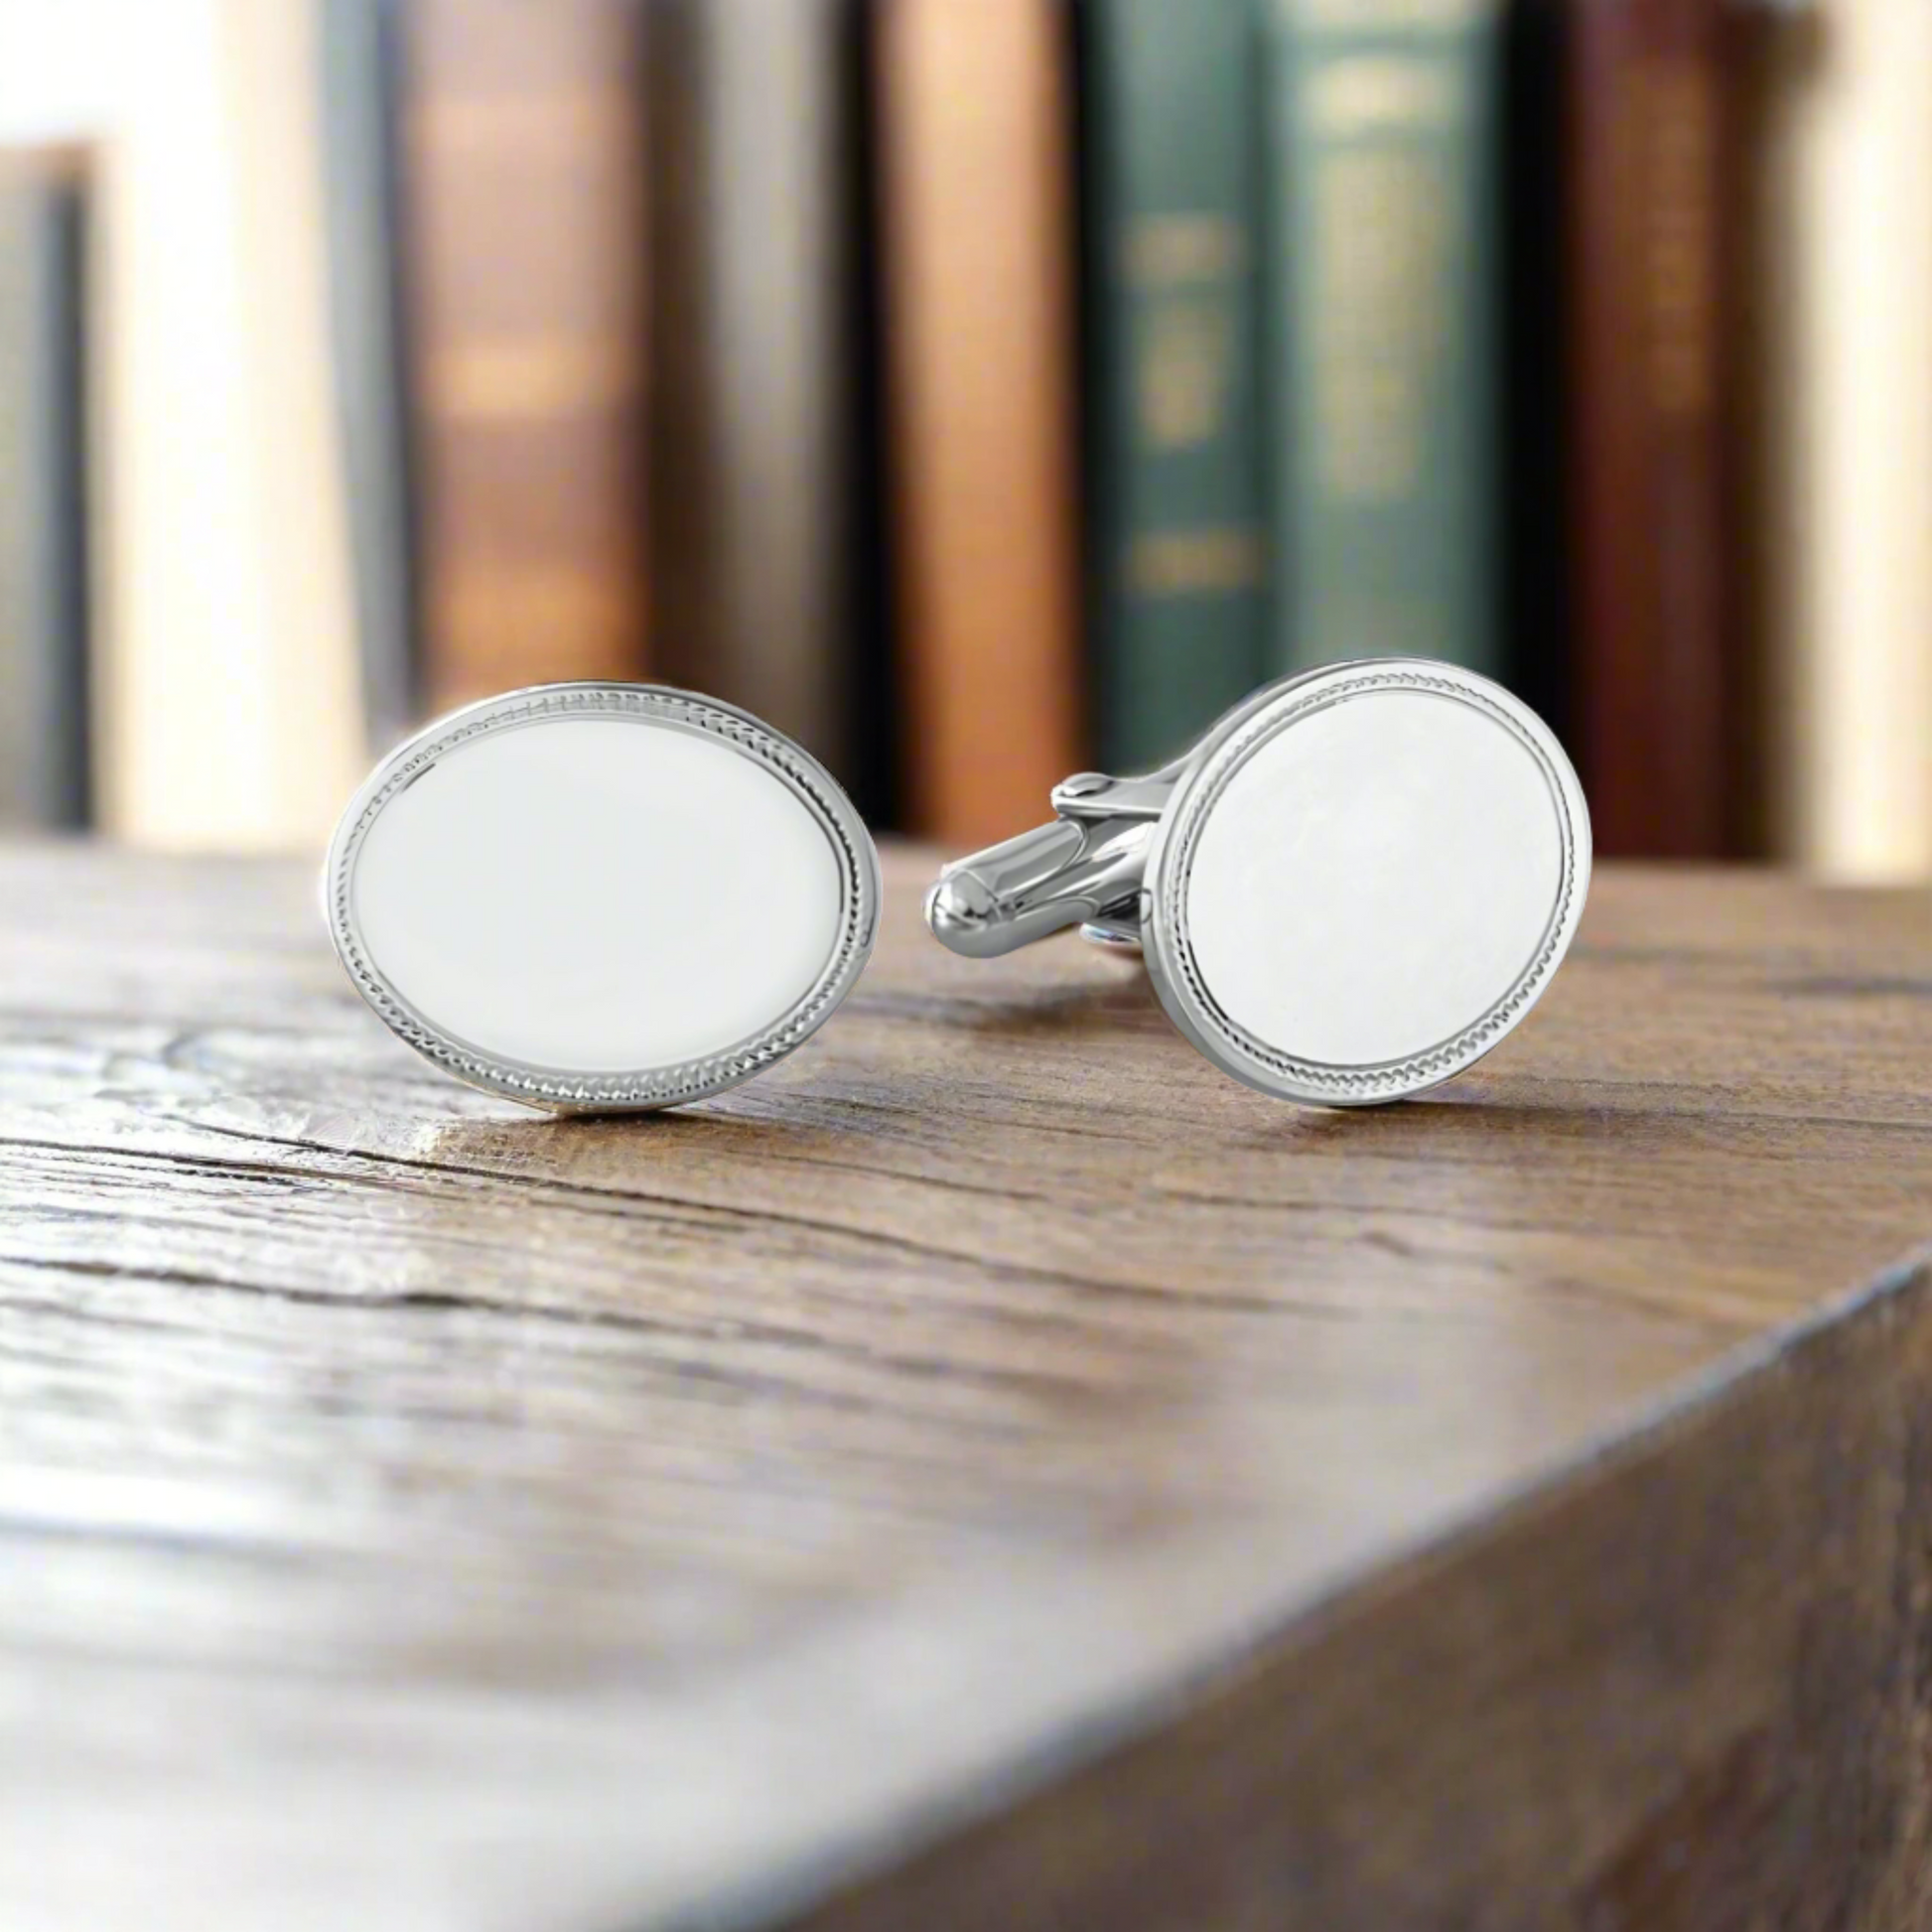 Sterling Silver Oval Cufflinks with Wriggled Engine Turned Design